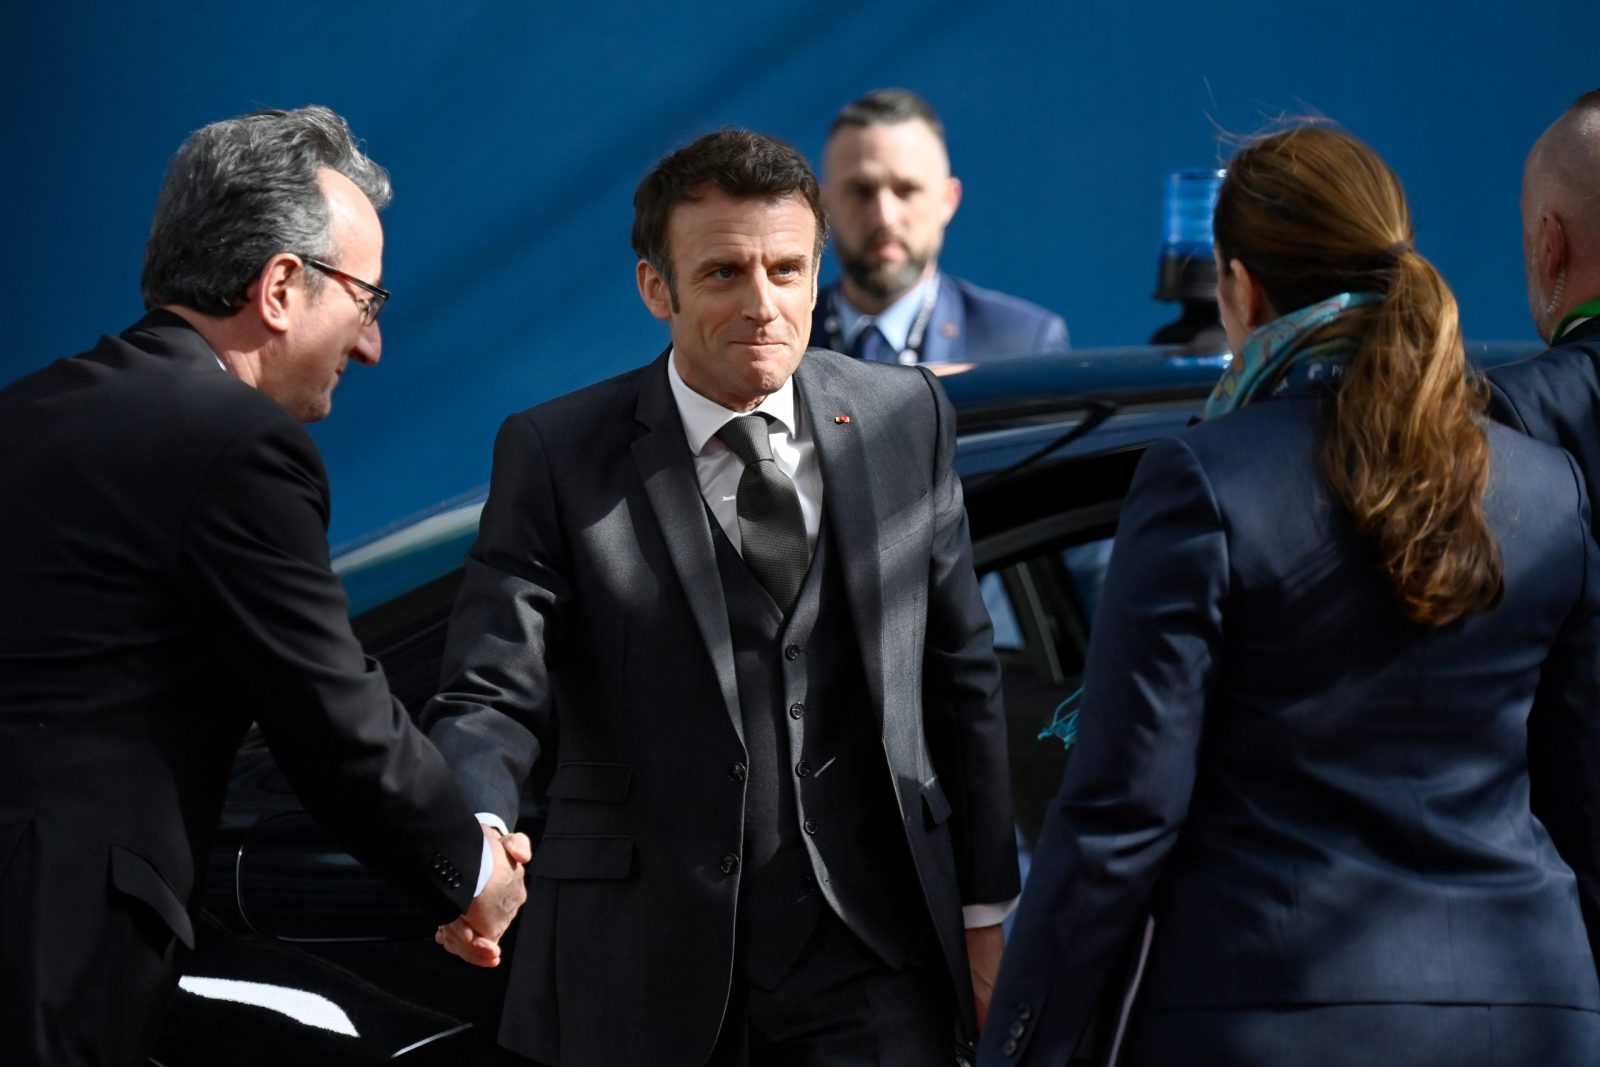 epa10538679 France's President Emmanuel Macron (L) arrives for a EU Summit, at the EU headquarters in Brussels, Belgium 23 March 2023. The two-day summit of the 27 European Union leaders in Brussels aims to build on previous European Council meetings where EU leaders will discuss the latest developments including continued EU support for Ukraine, the economy, energy, and migration.  EPA/JOHN THYS / POOL